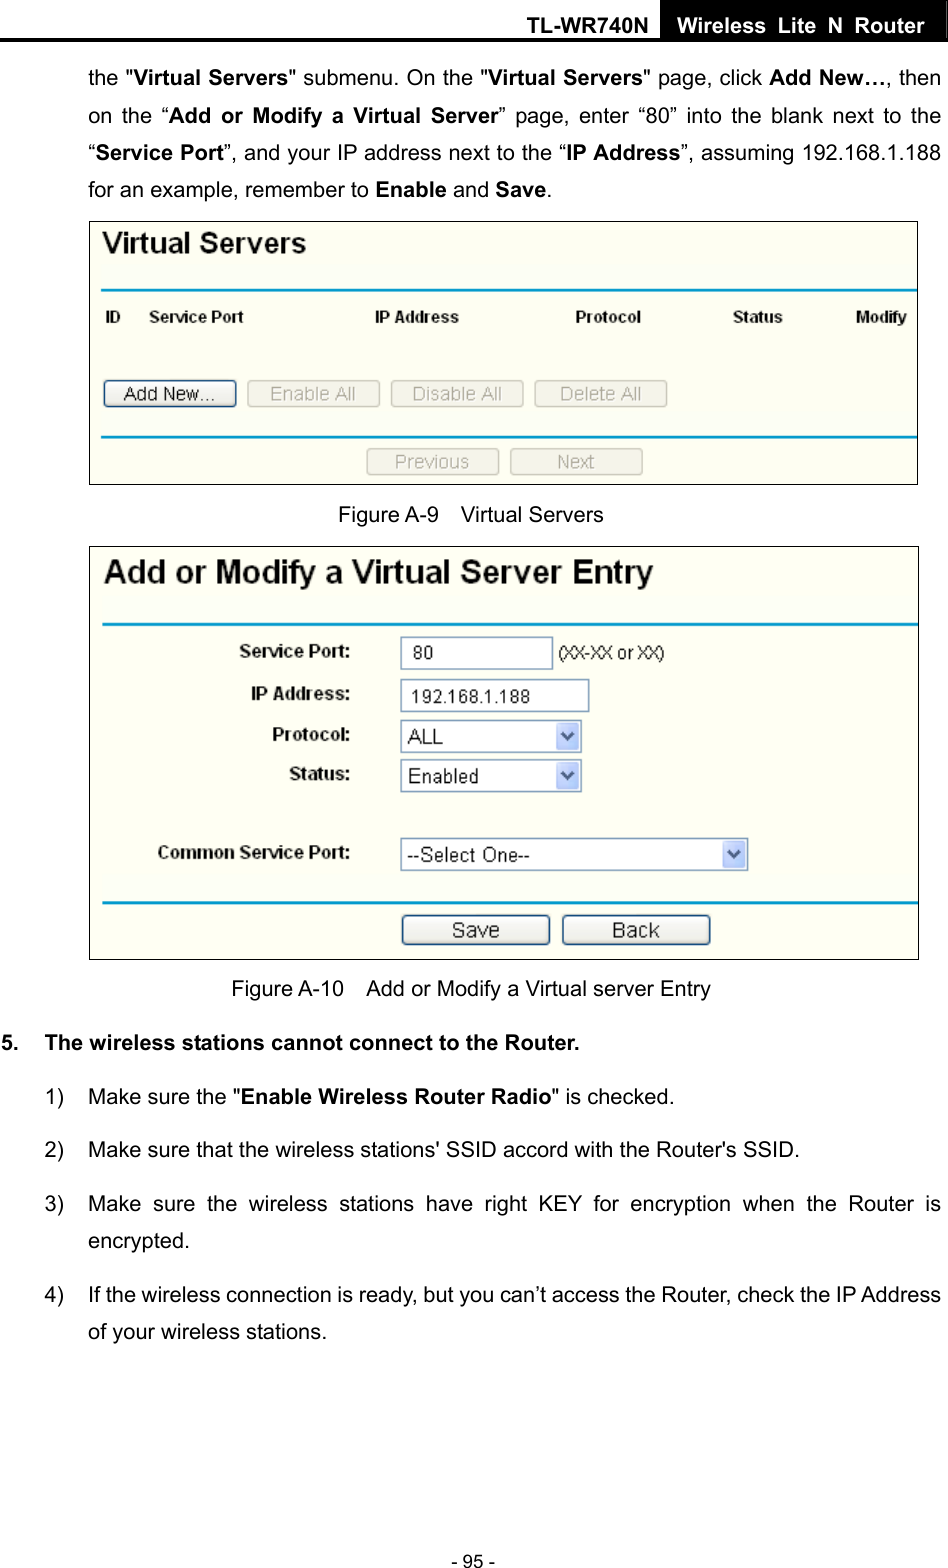 TL-WR740N Wireless Lite N Router  - 95 - the &quot;Virtual Servers&quot; submenu. On the &quot;Virtual Servers&quot; page, click Add New…, then on the “Add or Modify a Virtual Server” page, enter “80” into the blank next to the “Service Port”, and your IP address next to the “IP Address”, assuming 192.168.1.188 for an example, remember to Enable and Save.  Figure A-9  Virtual Servers  Figure A-10    Add or Modify a Virtual server Entry 5.  The wireless stations cannot connect to the Router. 1)  Make sure the &quot;Enable Wireless Router Radio&quot; is checked. 2)  Make sure that the wireless stations&apos; SSID accord with the Router&apos;s SSID. 3)  Make sure the wireless stations have right KEY for encryption when the Router is encrypted. 4)  If the wireless connection is ready, but you can’t access the Router, check the IP Address of your wireless stations. 